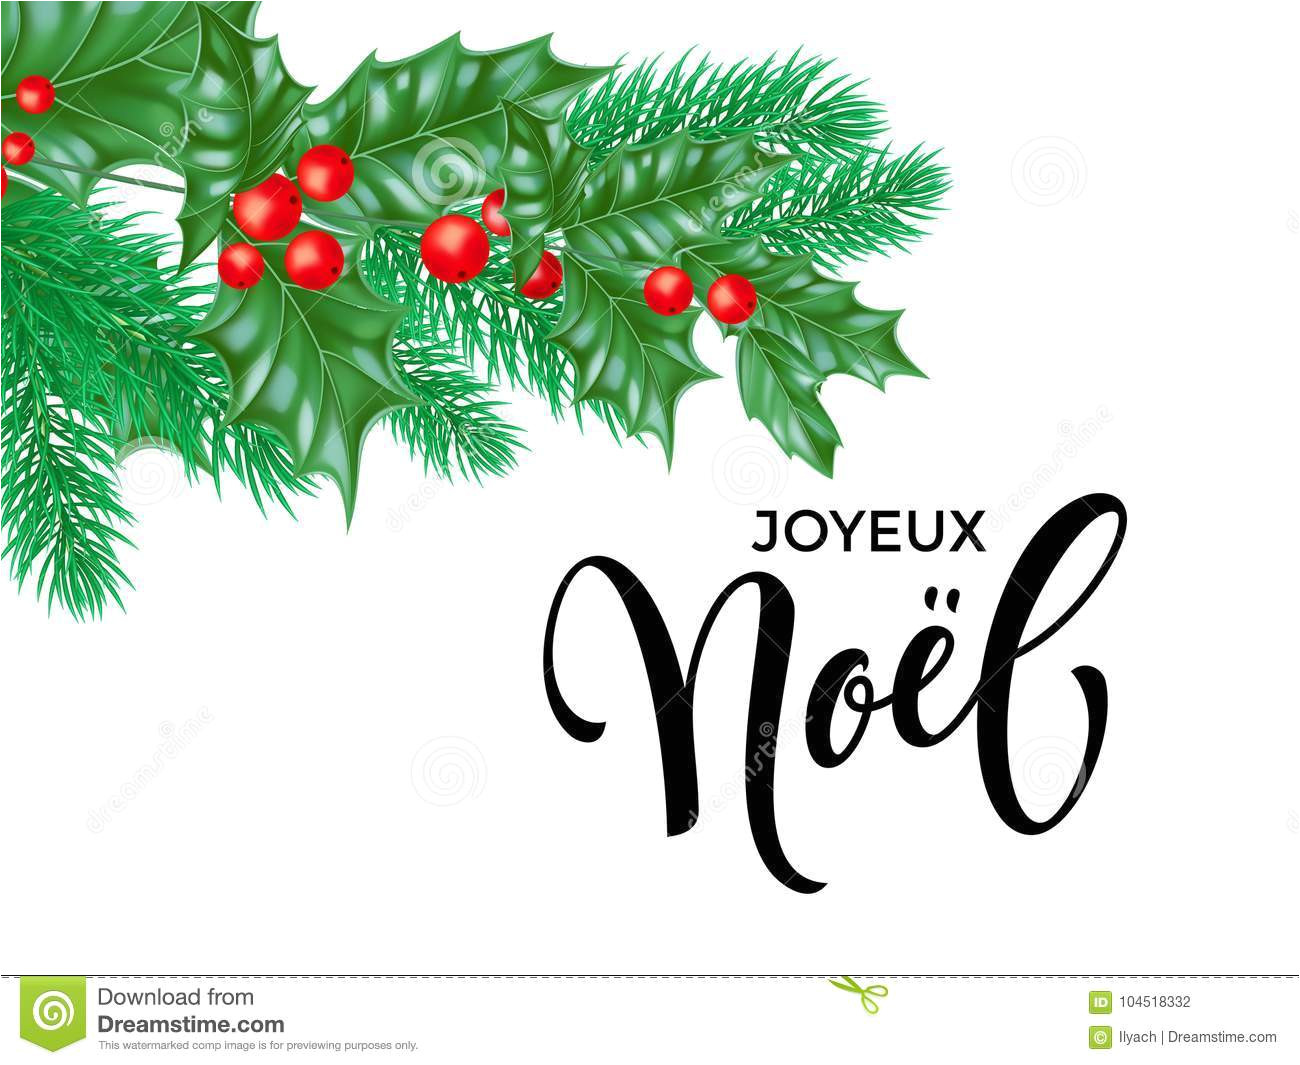 joyeux noel french merry christmas hand drawn quote calligraphy christmas holly wreath holiday greeting card background 104518332 jpg